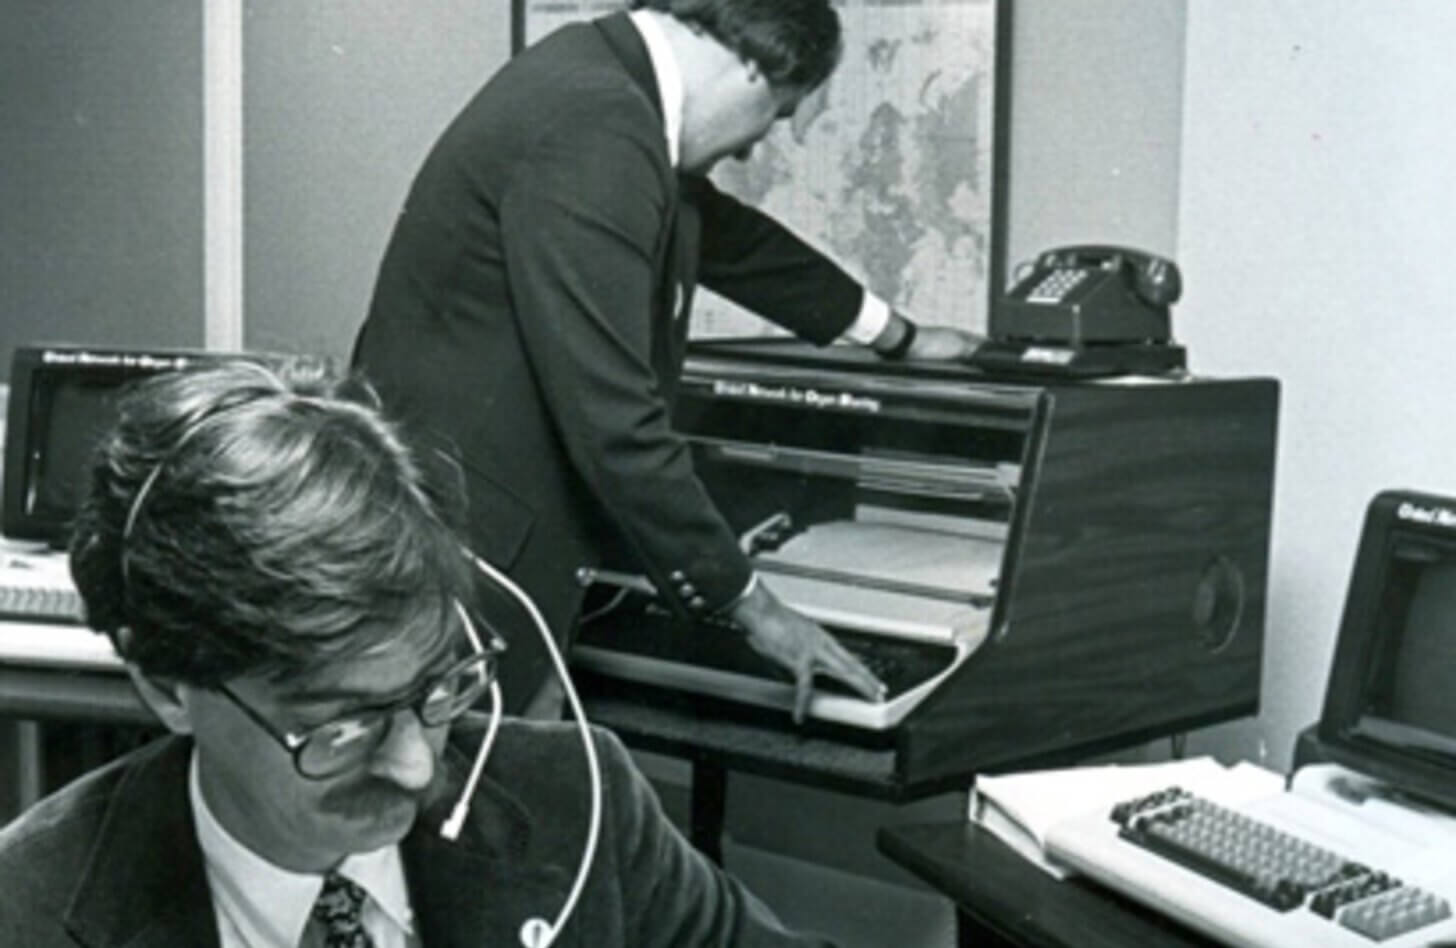 1984 - Working by phone, fax and manual logs, UNOS organ placement specialists work to save lives. 